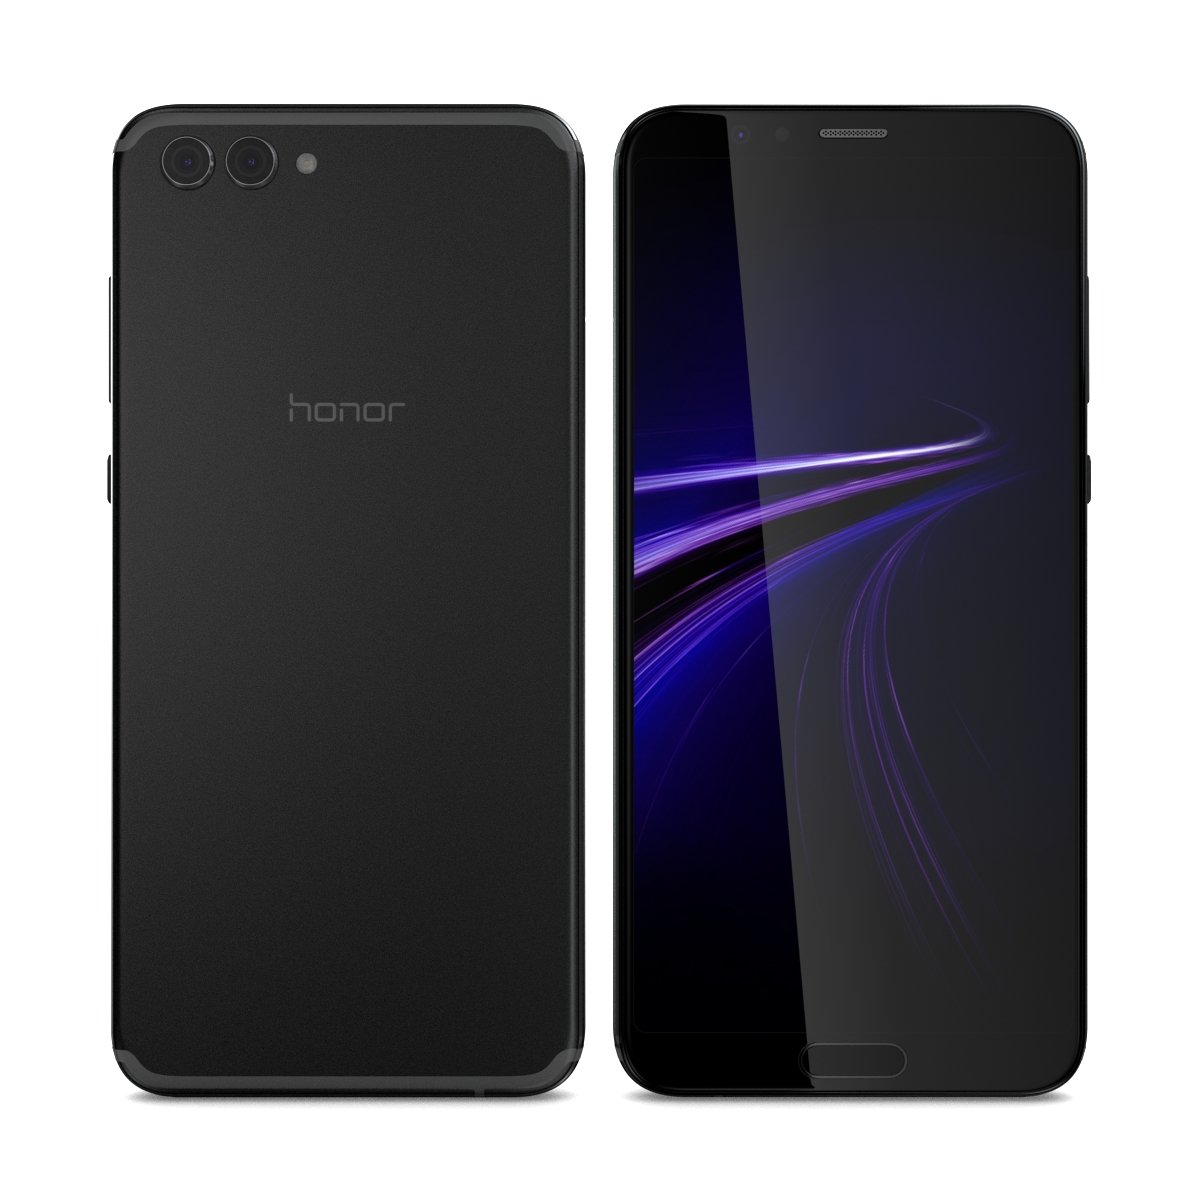 Honor huawei 128. Honor view 10. Huawei Honor view 10. Хонор 10 view. Honor view 10 128gb.